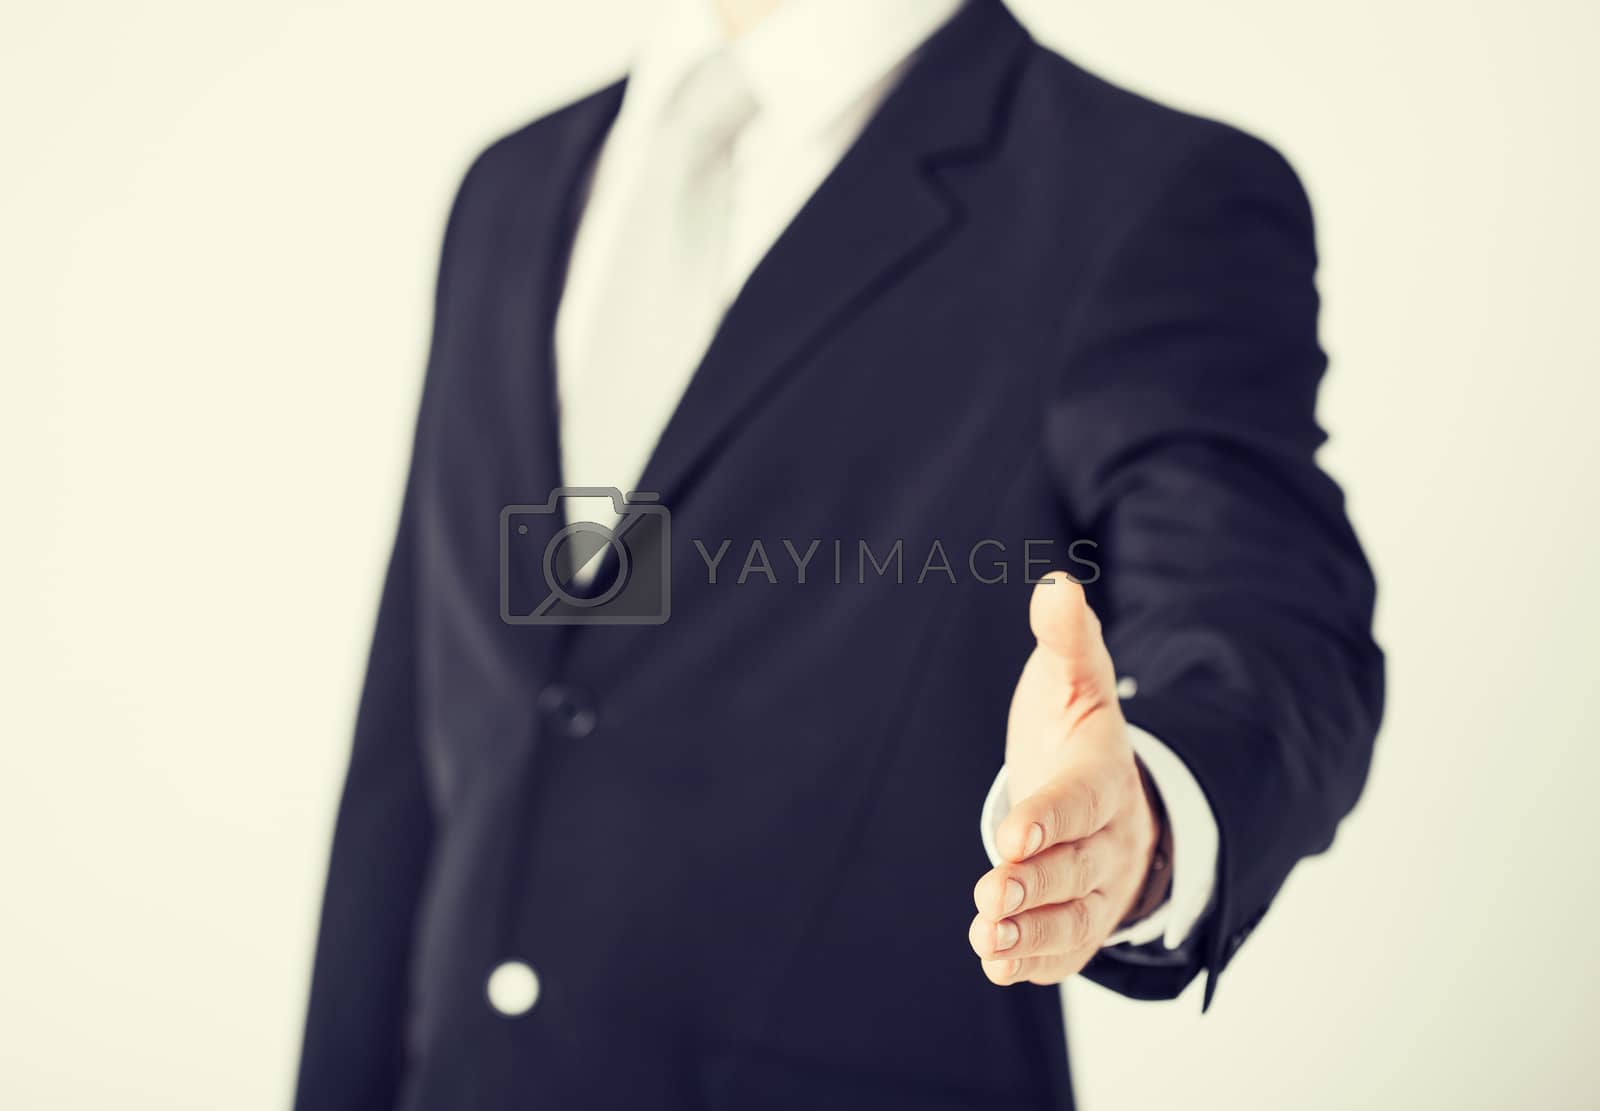 Royalty free image of businessman with open hand by dolgachov